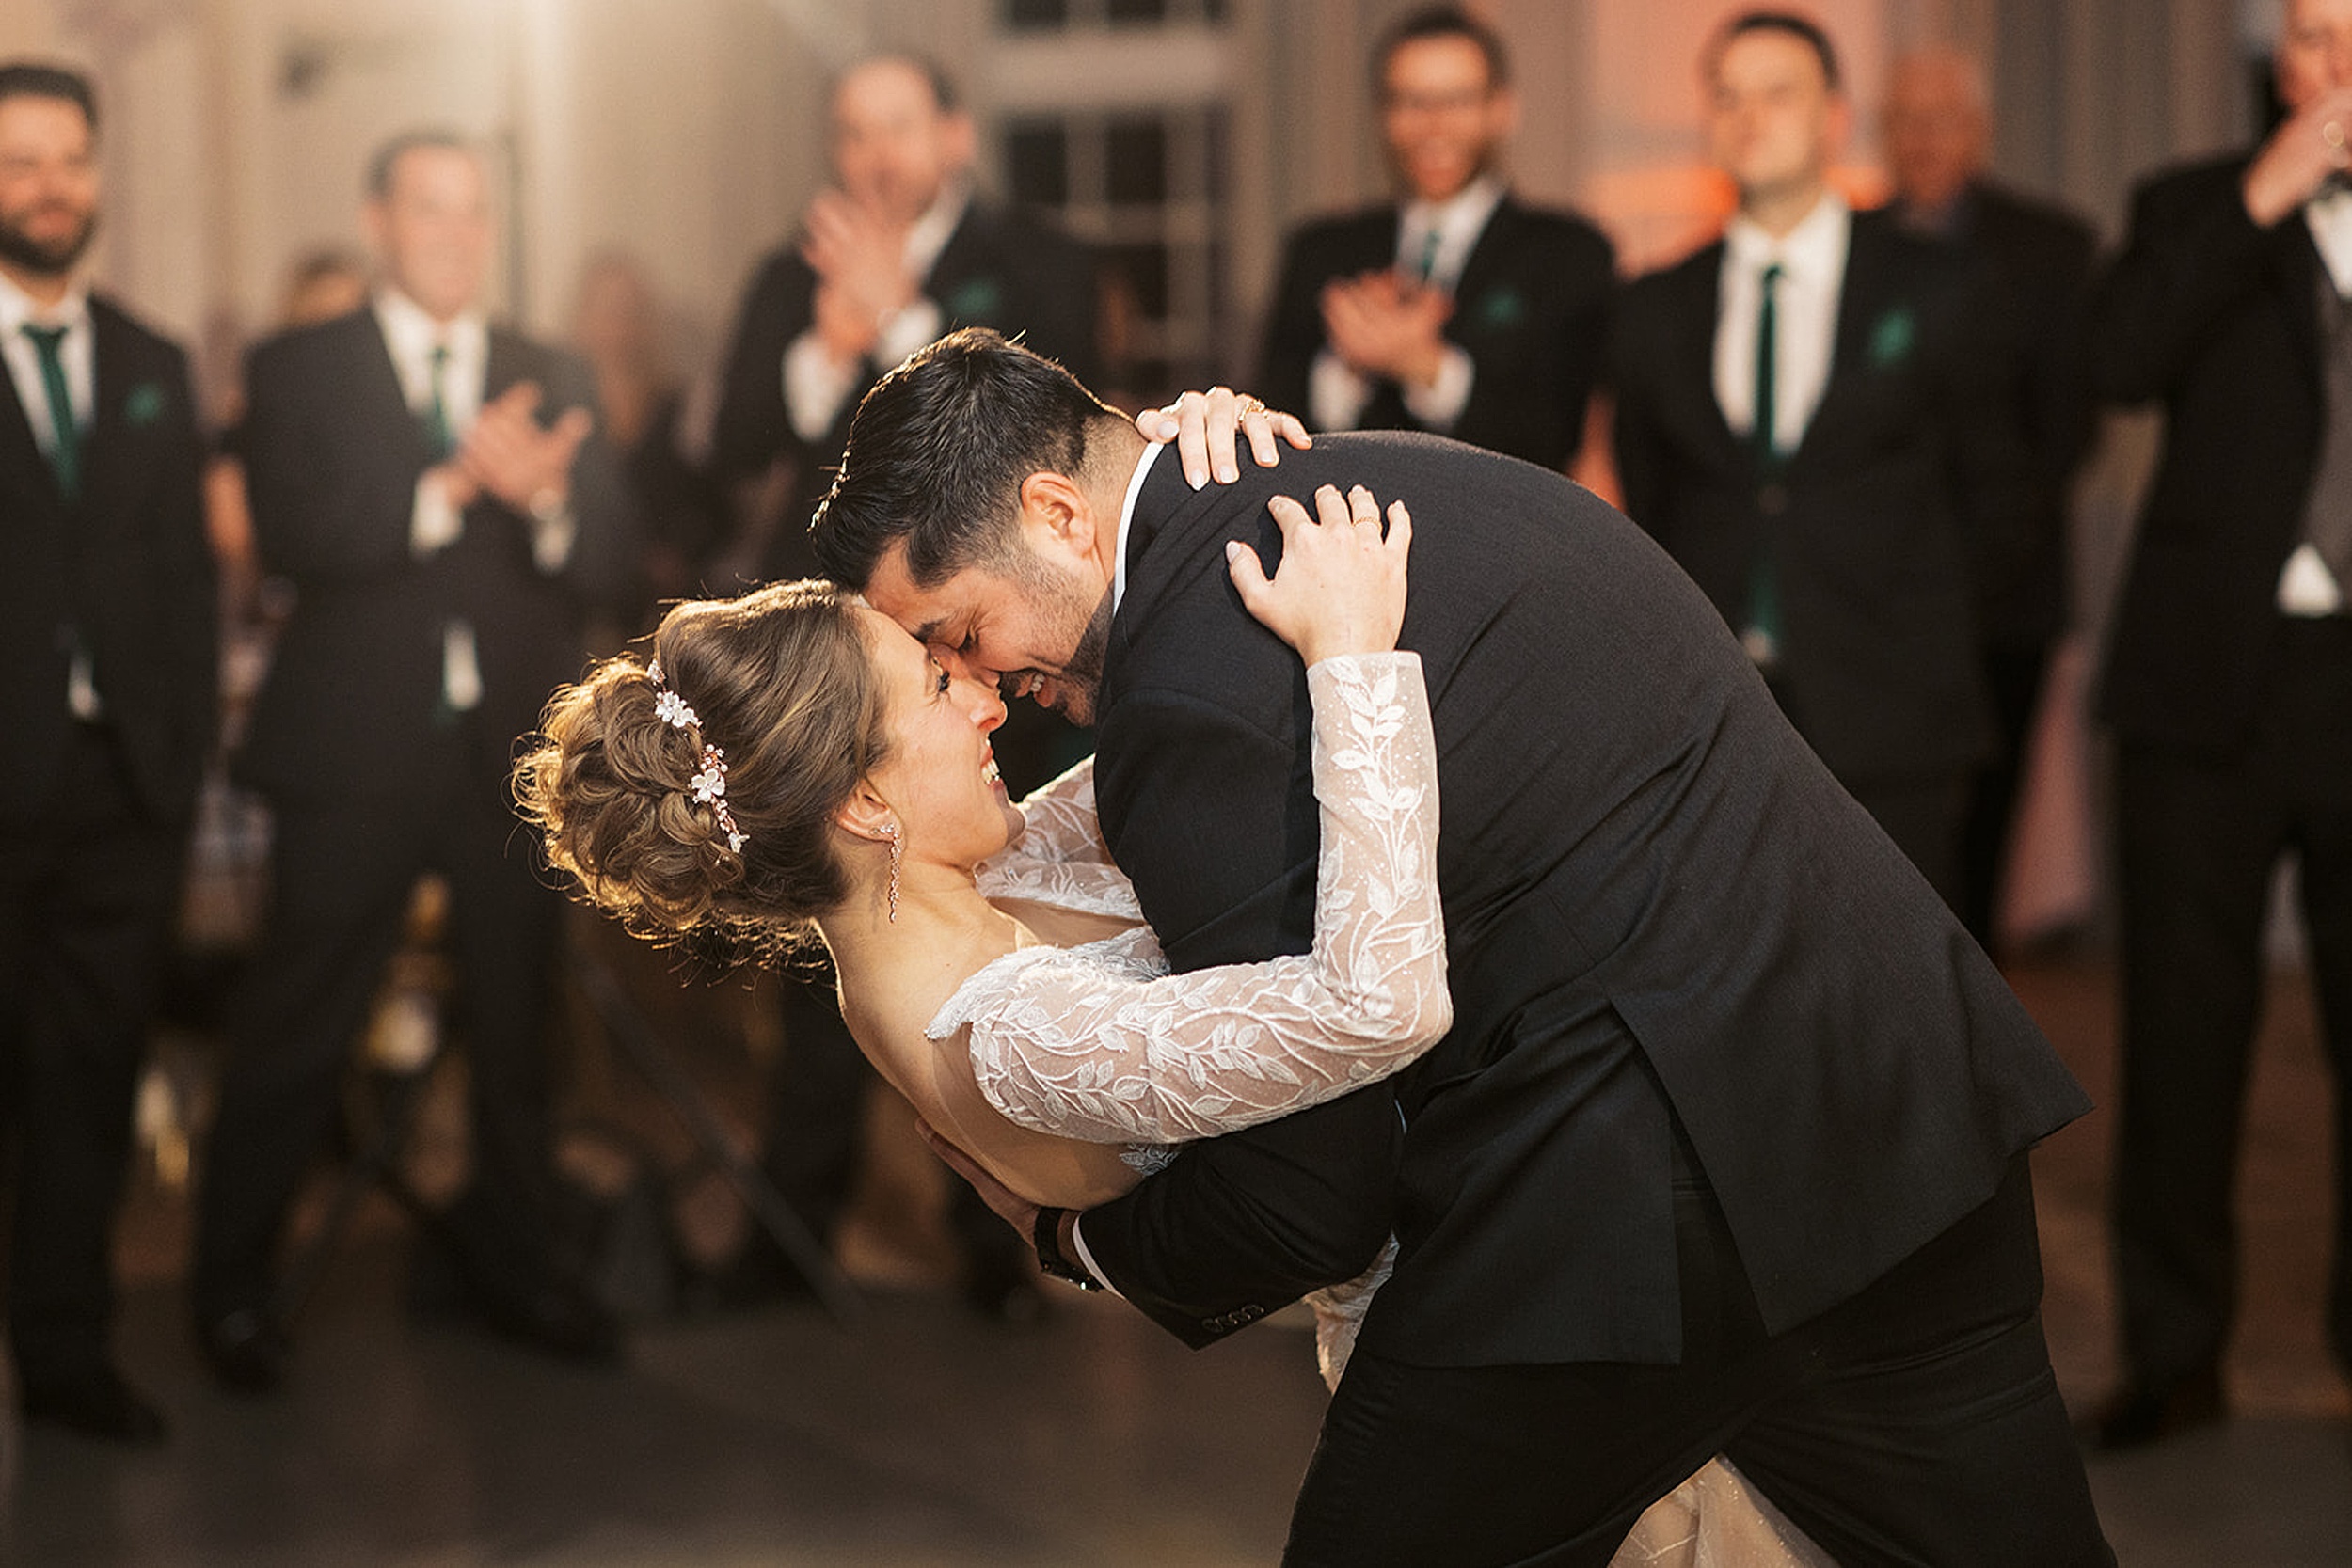 Newlyweds dance and dip during their first dance with the groomsmen cheering behind them at a Crystal Springs Wedding